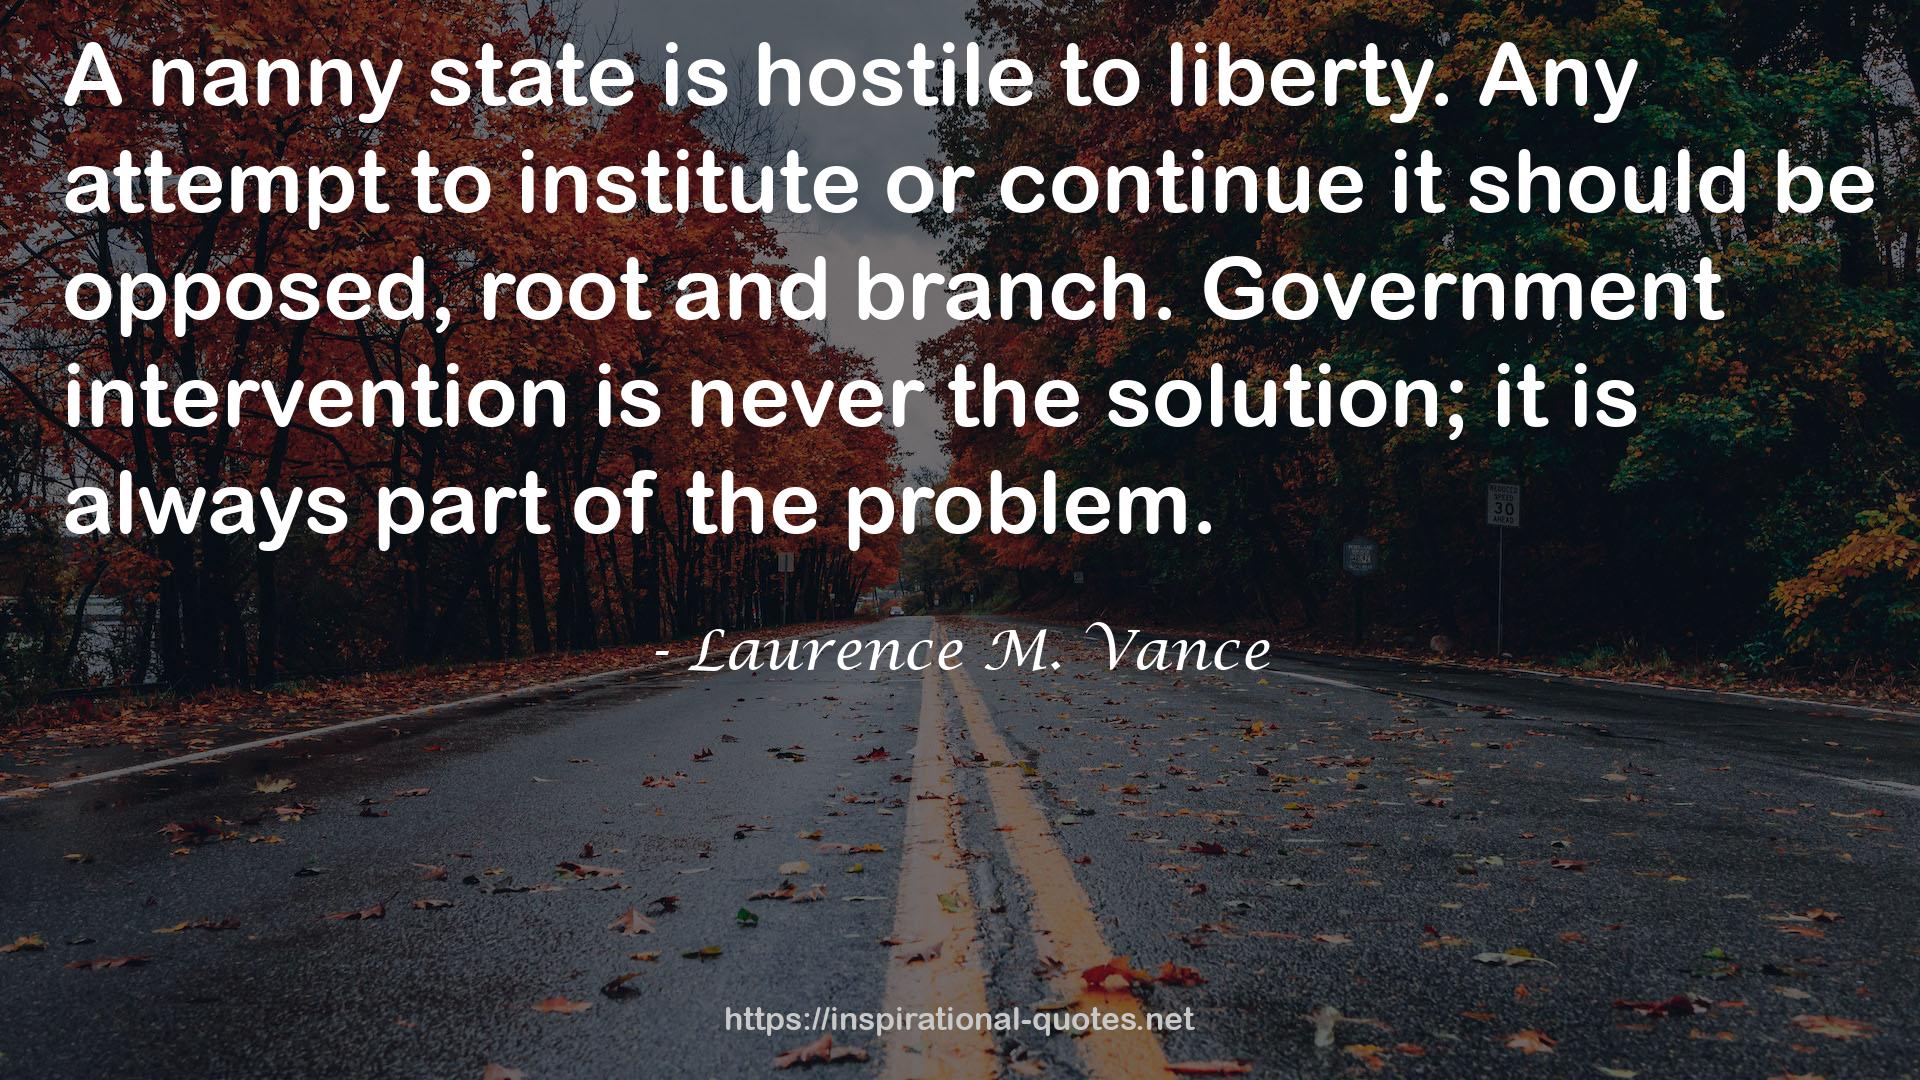 Laurence M. Vance QUOTES